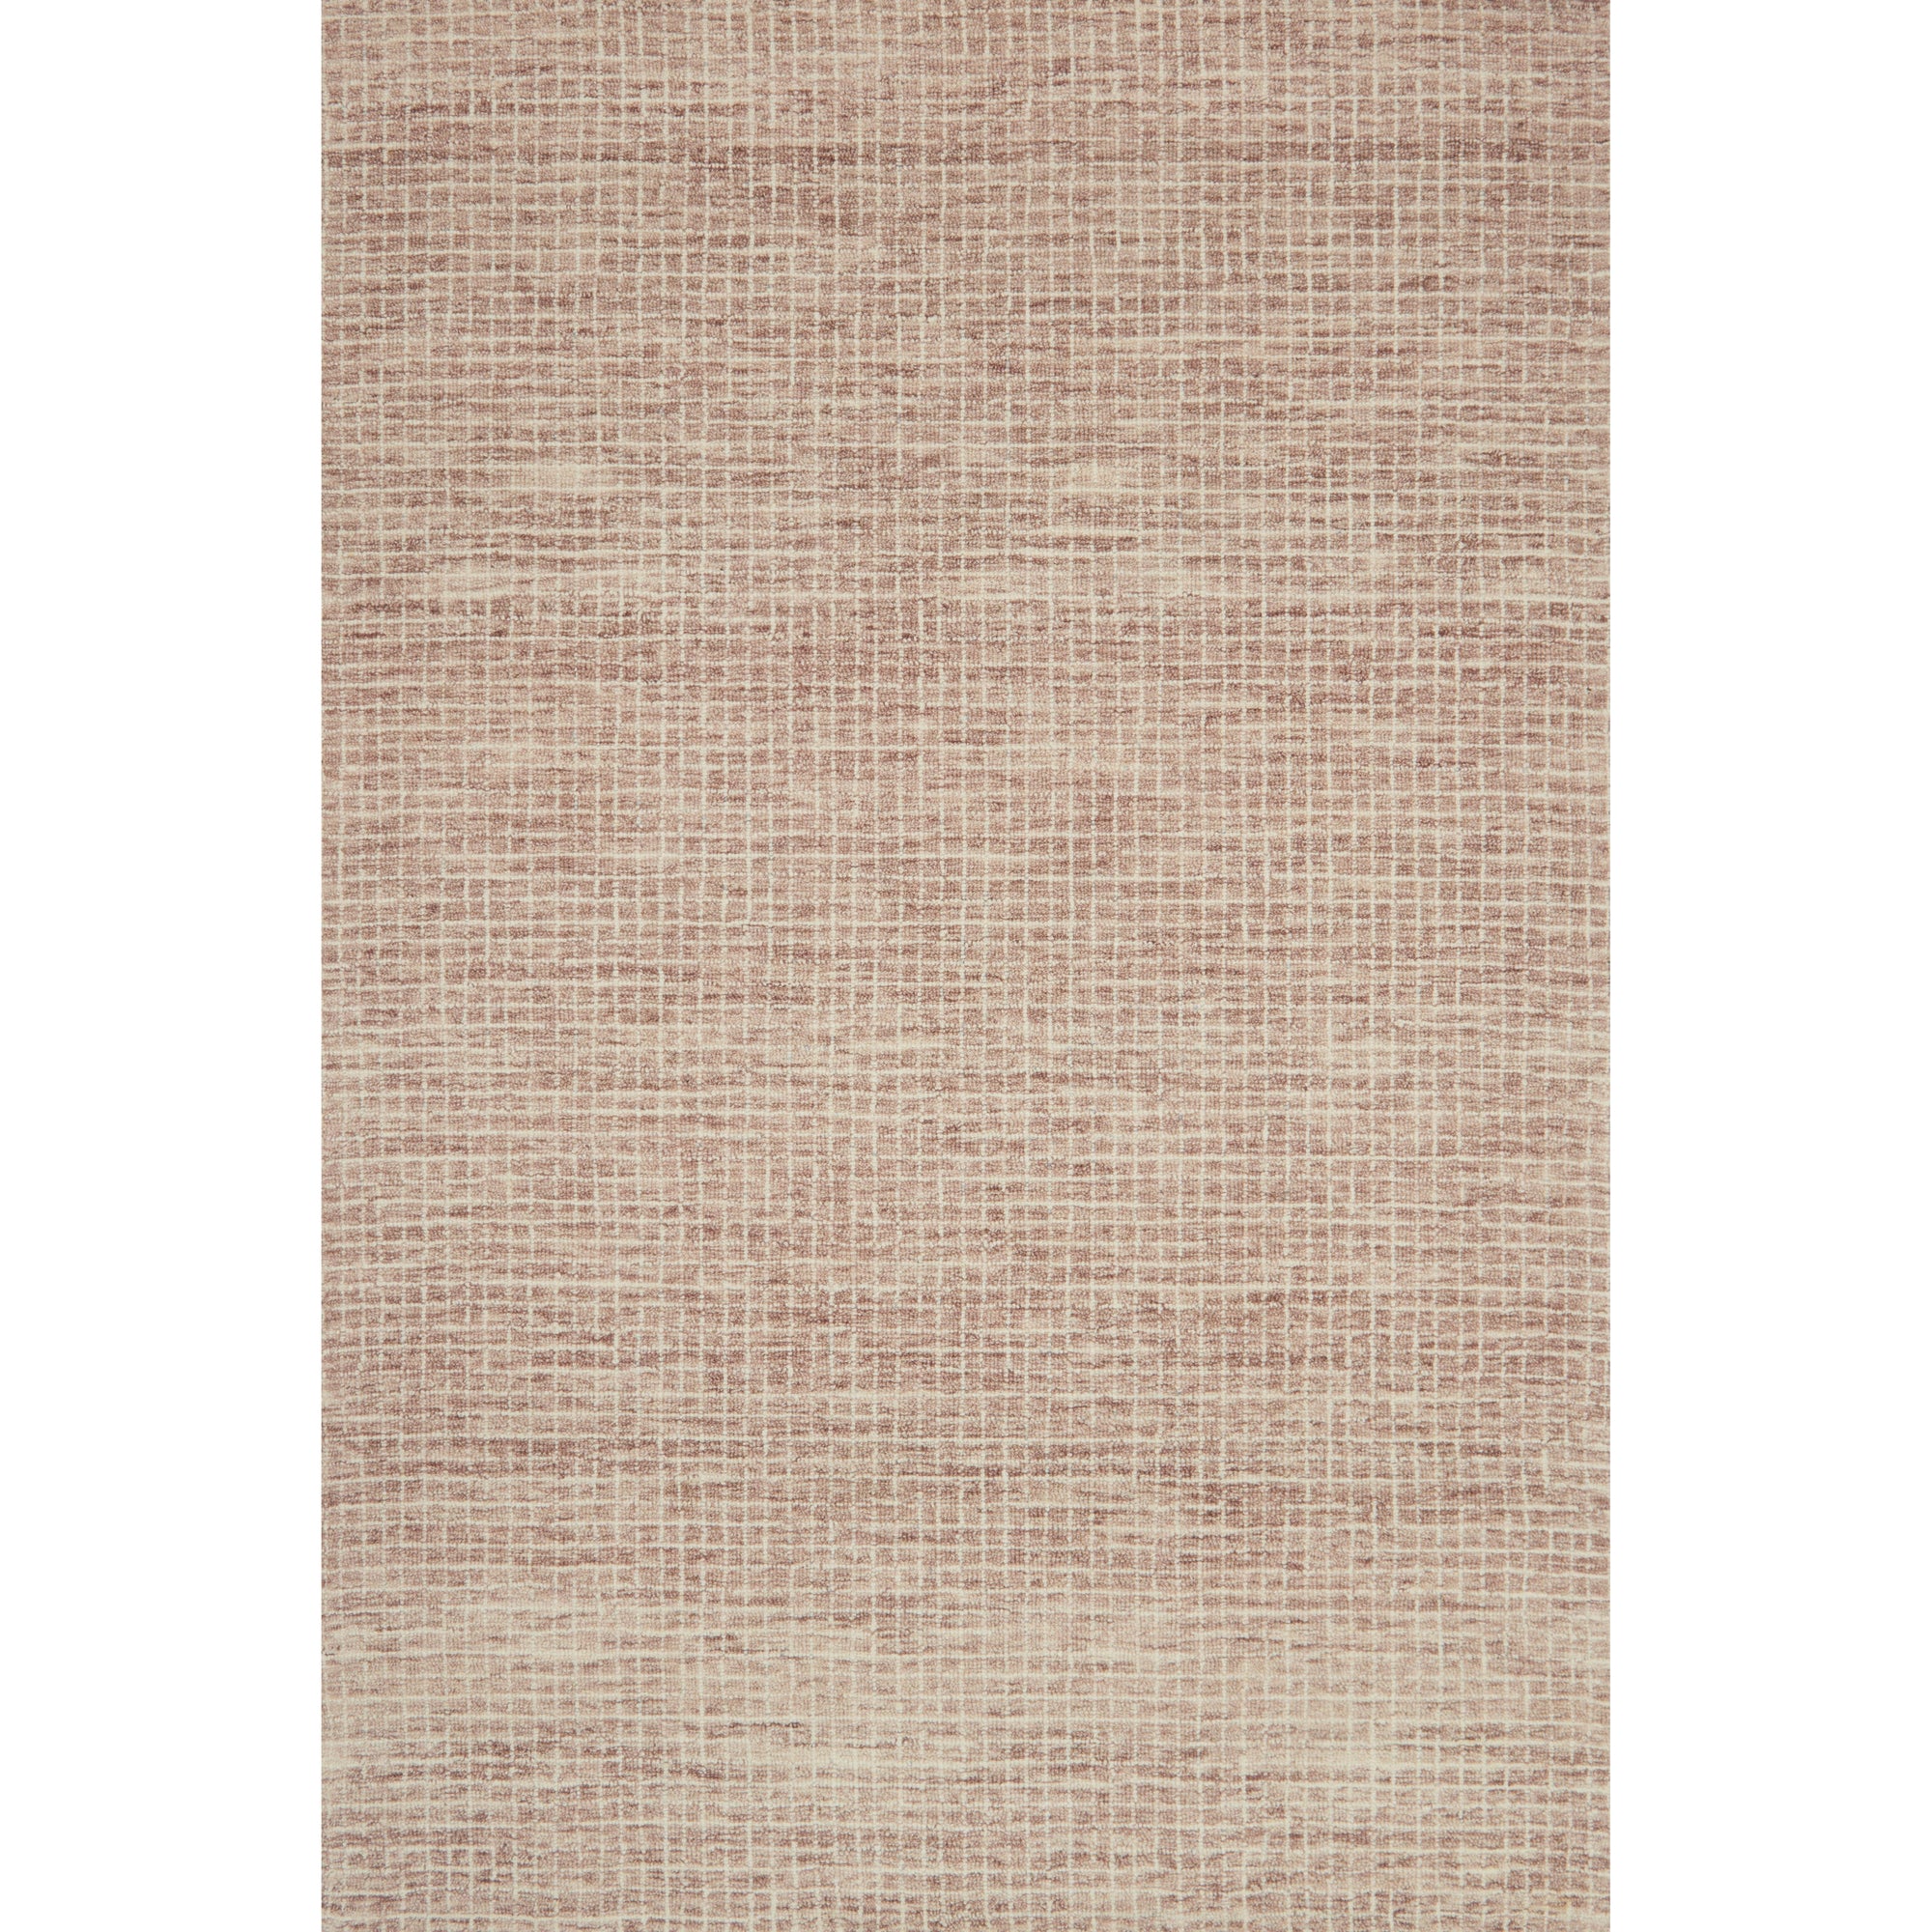 Rugs by Roo Loloi Giana Blush Area Rug in size 2' 6" x 7' 6"